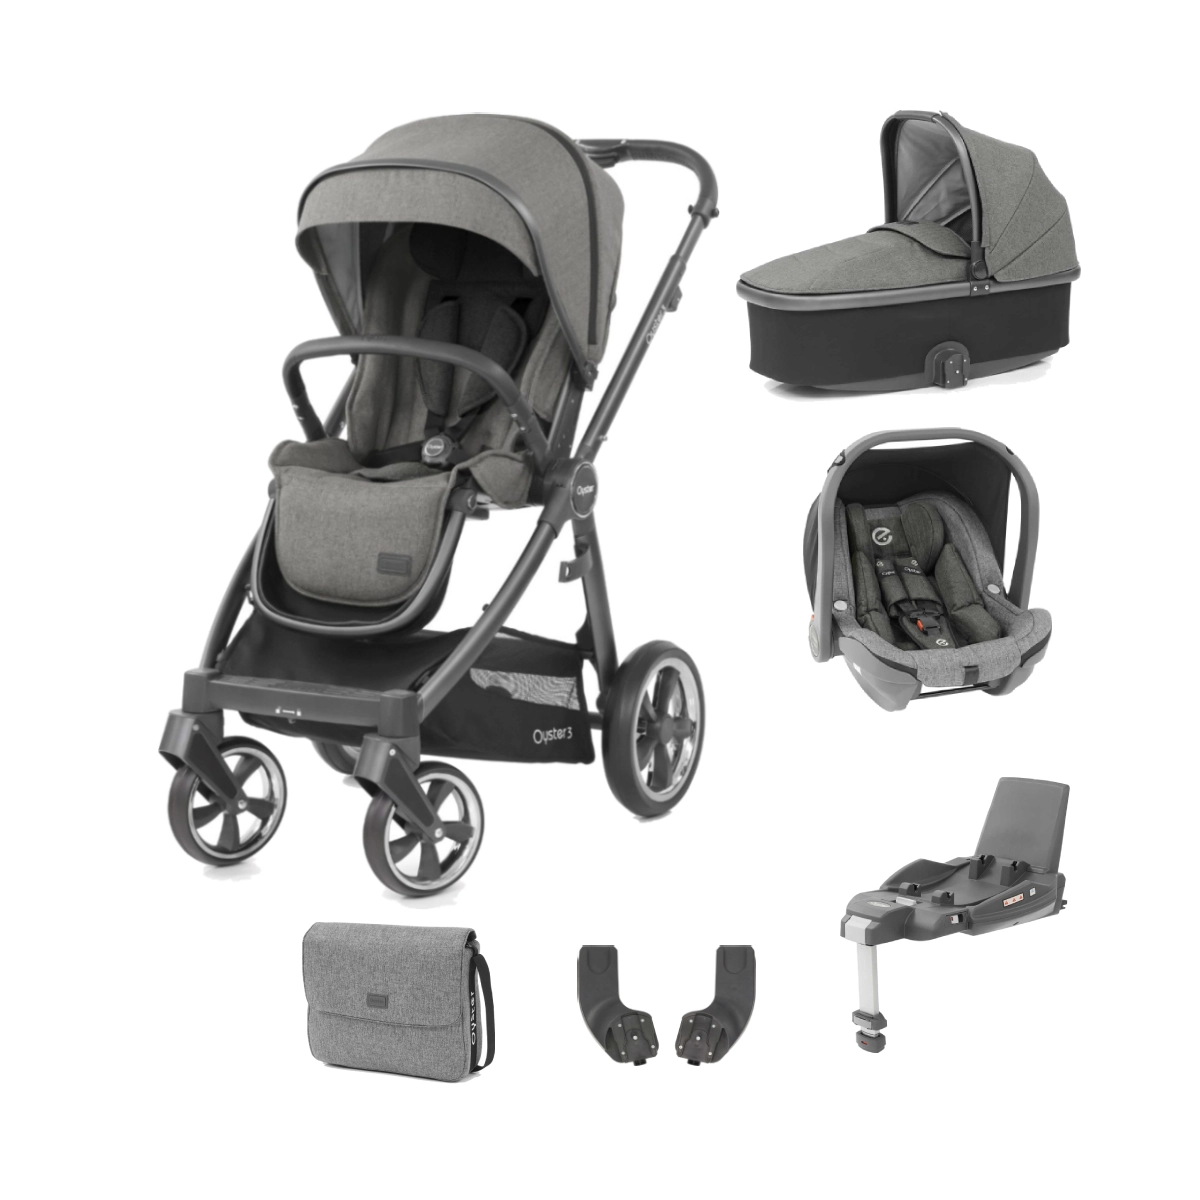 BabyStyle Oyster 3 City Grey Finish Edition Luxury Travel System